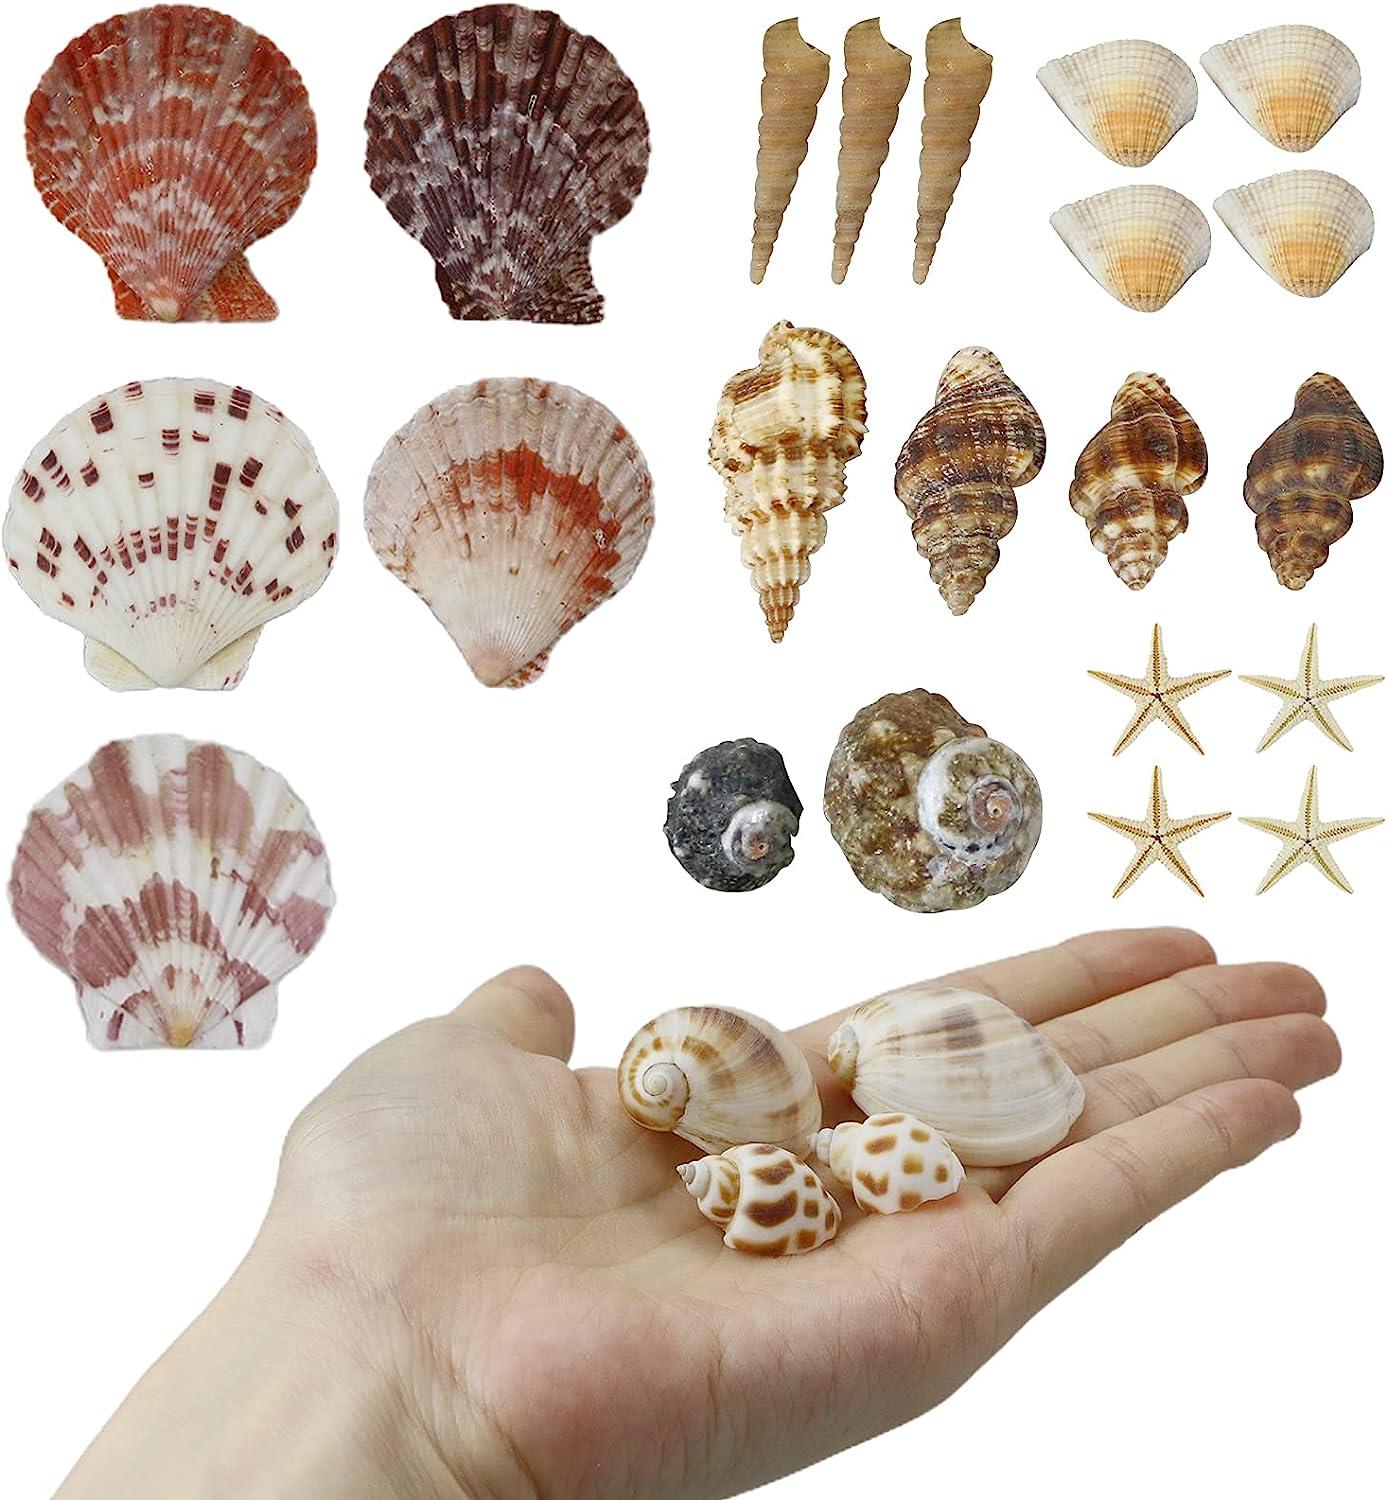 WEOXPR Mixed Sea Shells, 100+ Pcs Beach Seashells Starfish, Various Sizes  Ocean Seashells for Fish Tank Vase Fillers, Beach Theme Party Wedding Decor,  Candle Making, DIY Crafts, Home Decorations